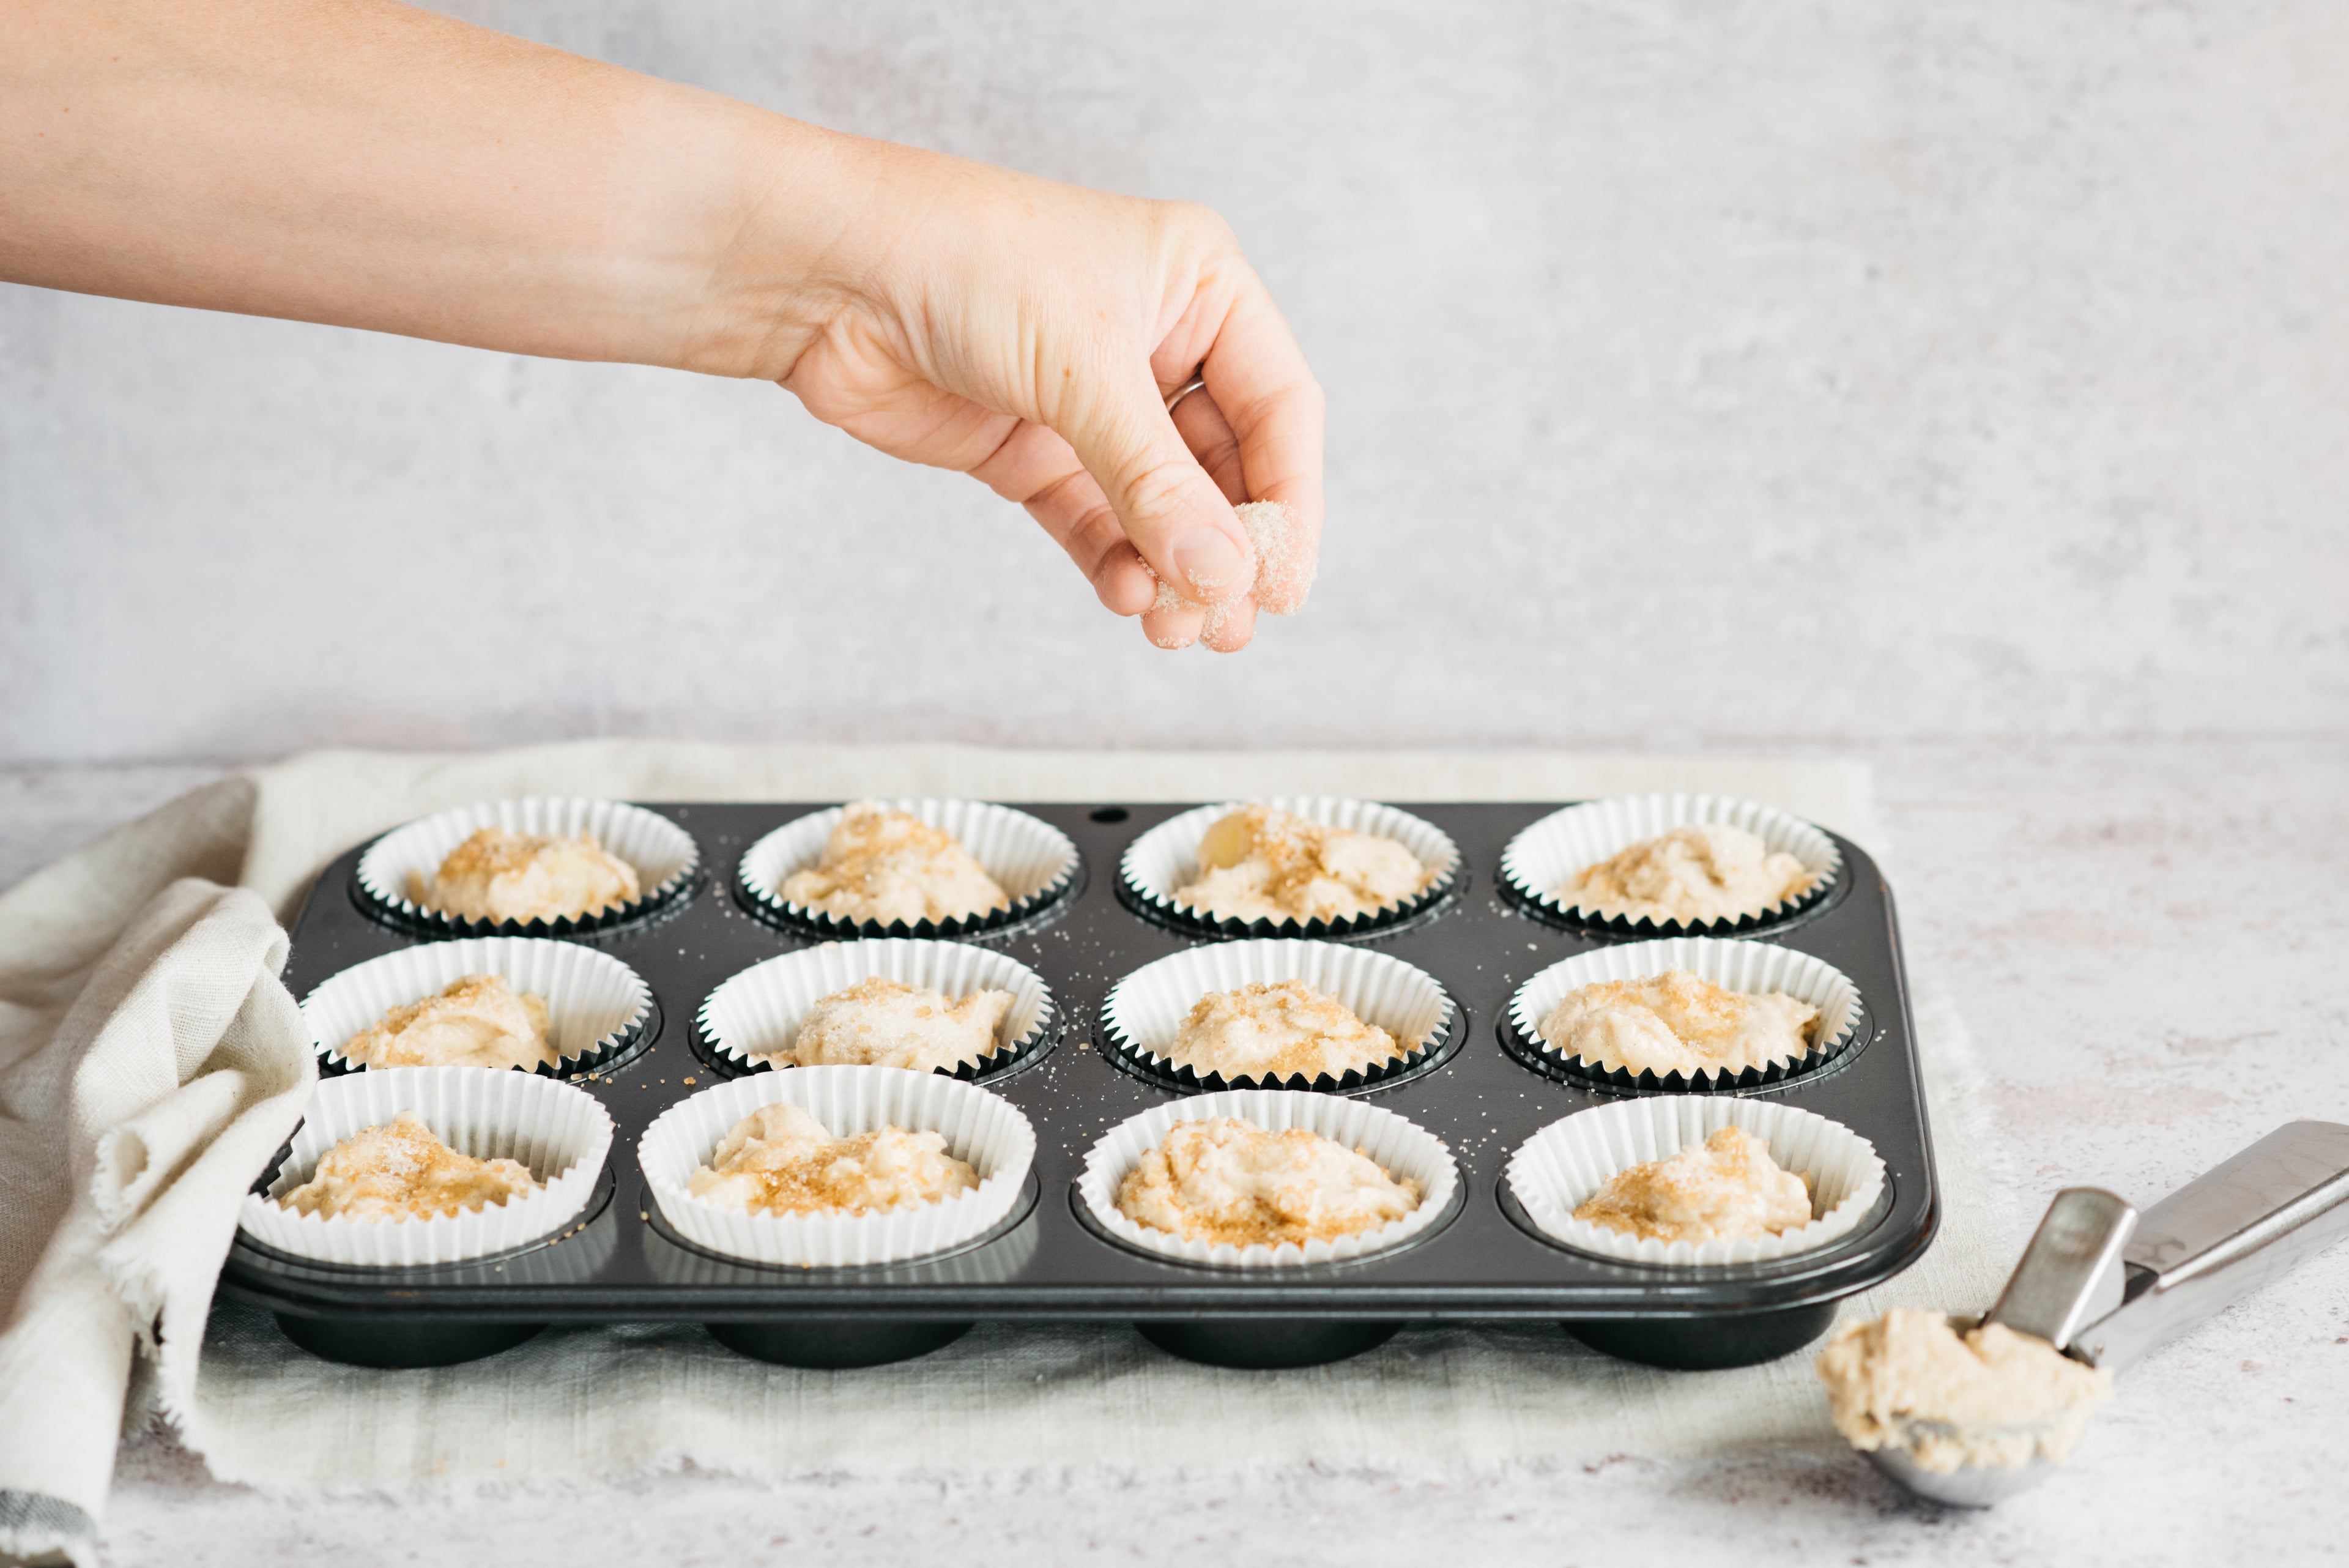 Hand sprinkling sugar on top of muffins in baking tray